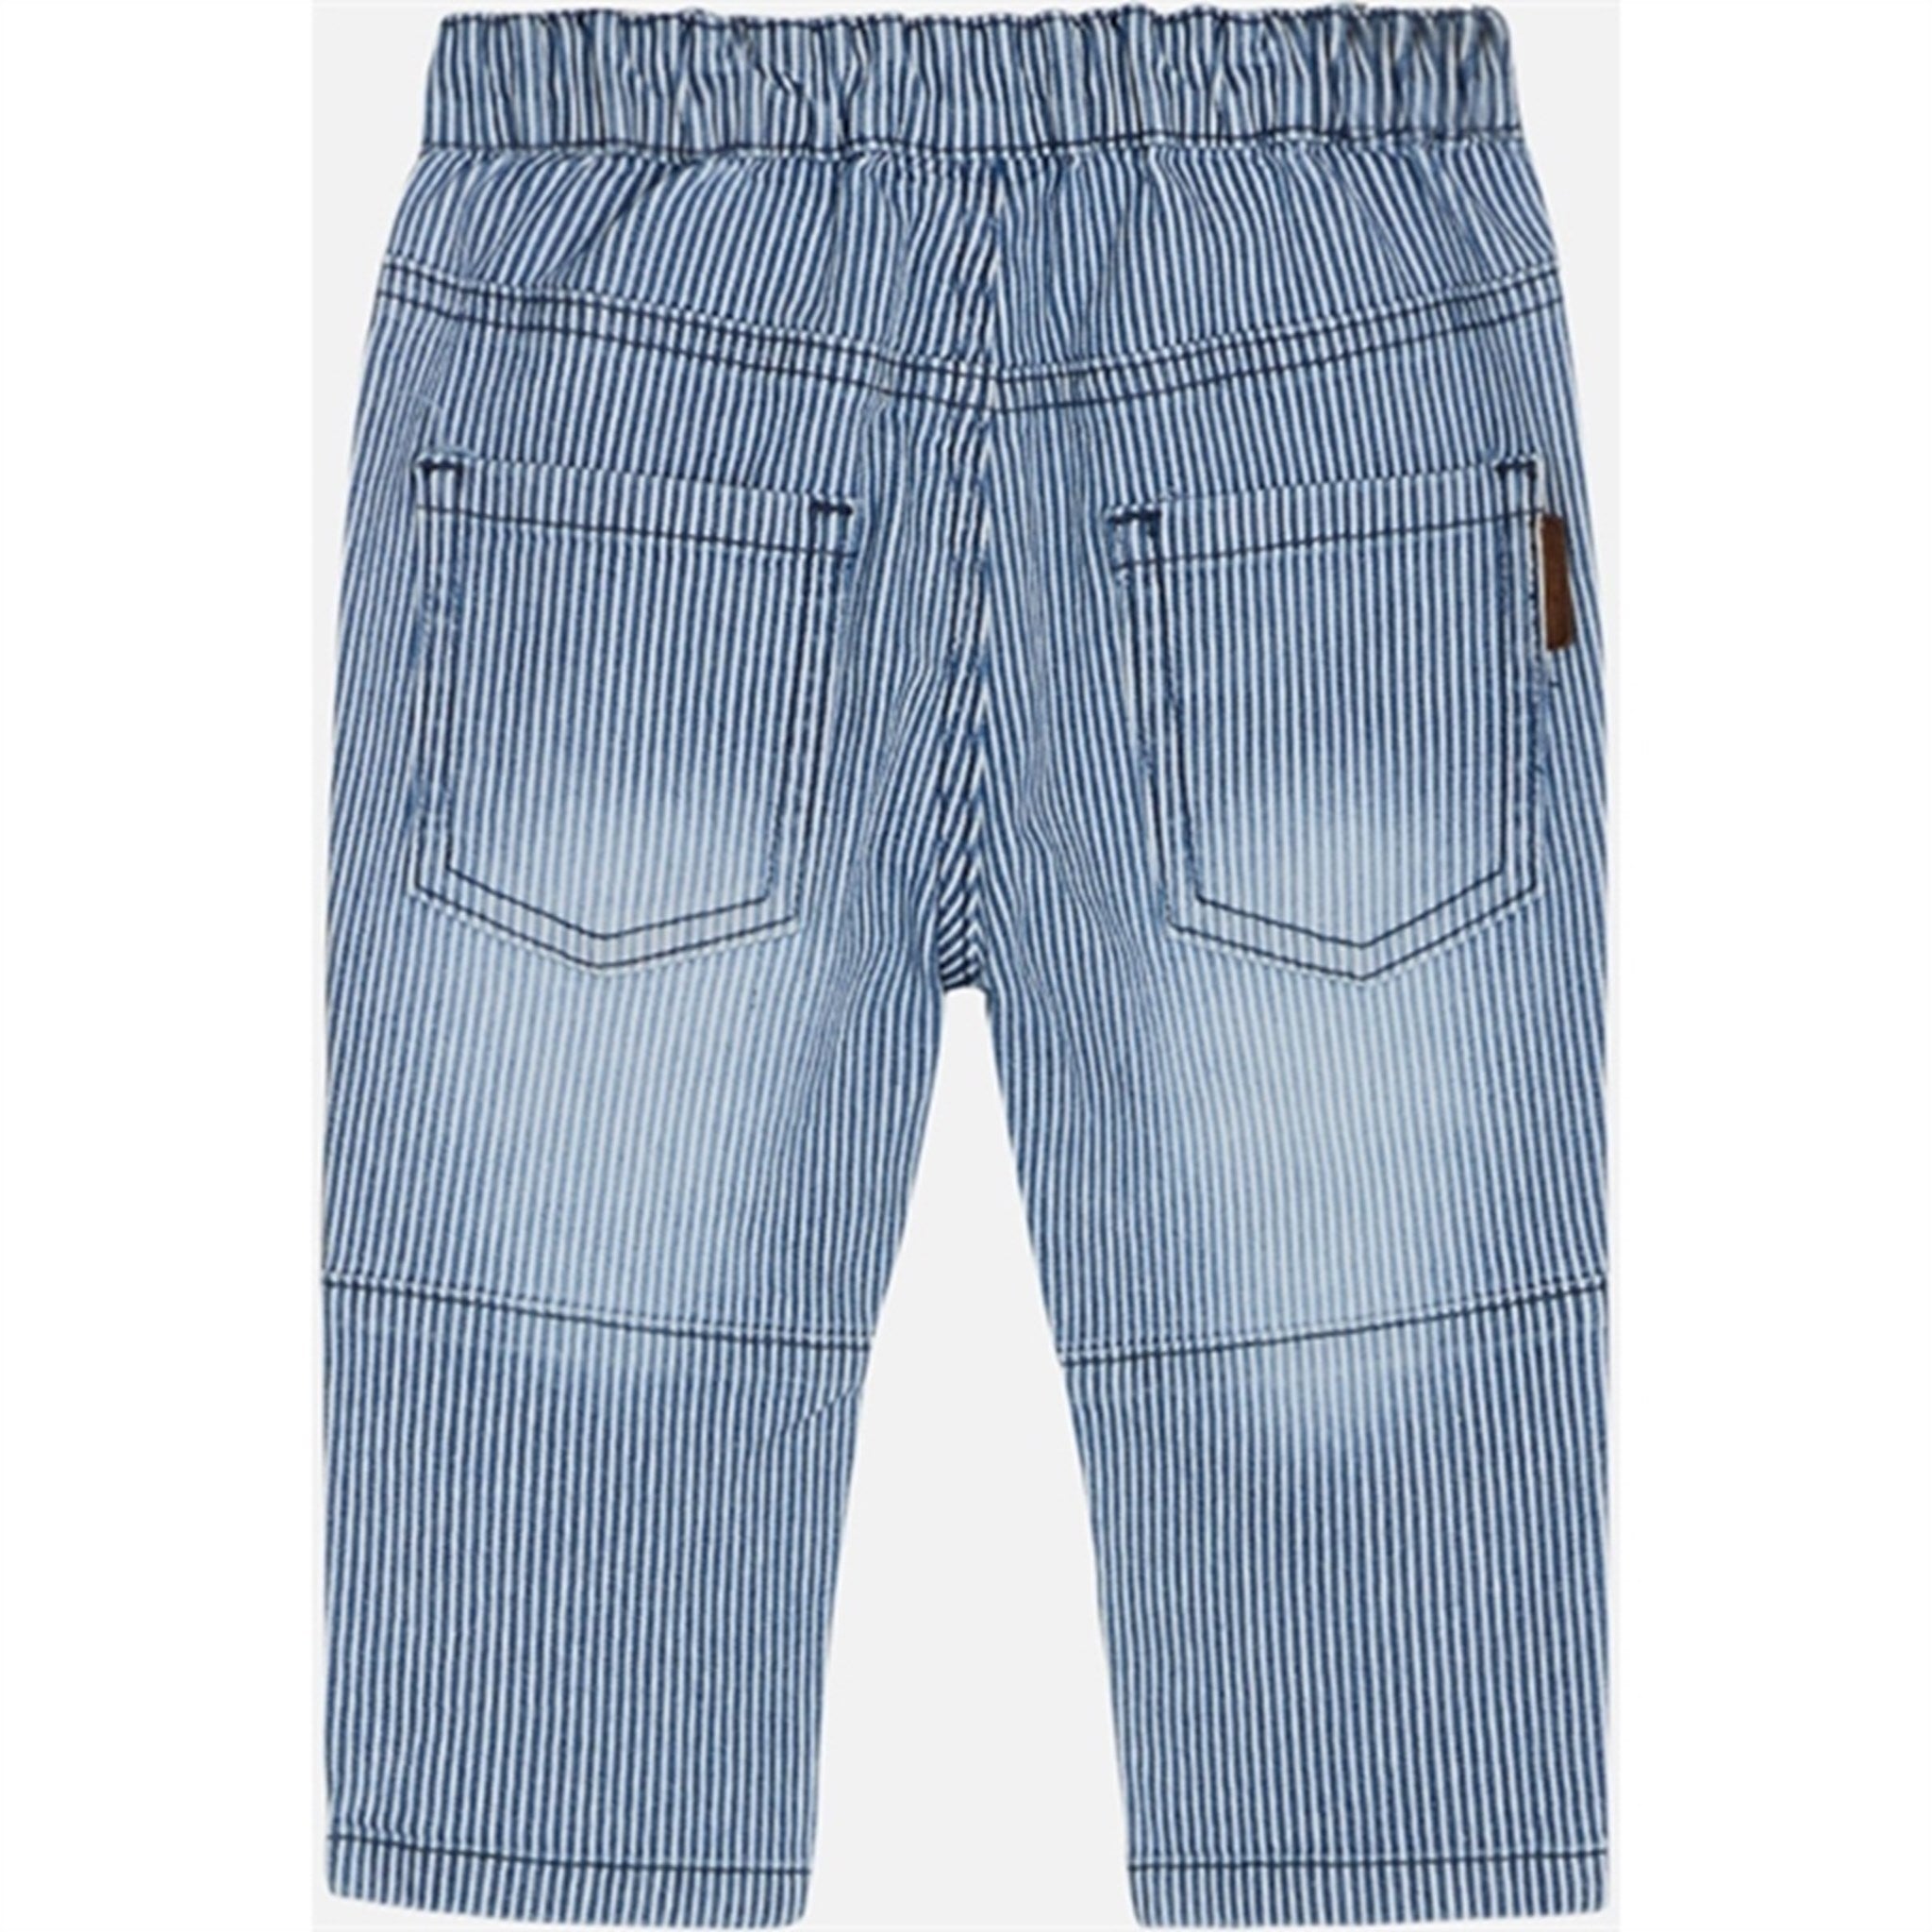 Hust & Claire Baby Stripes Junior Jeans 4